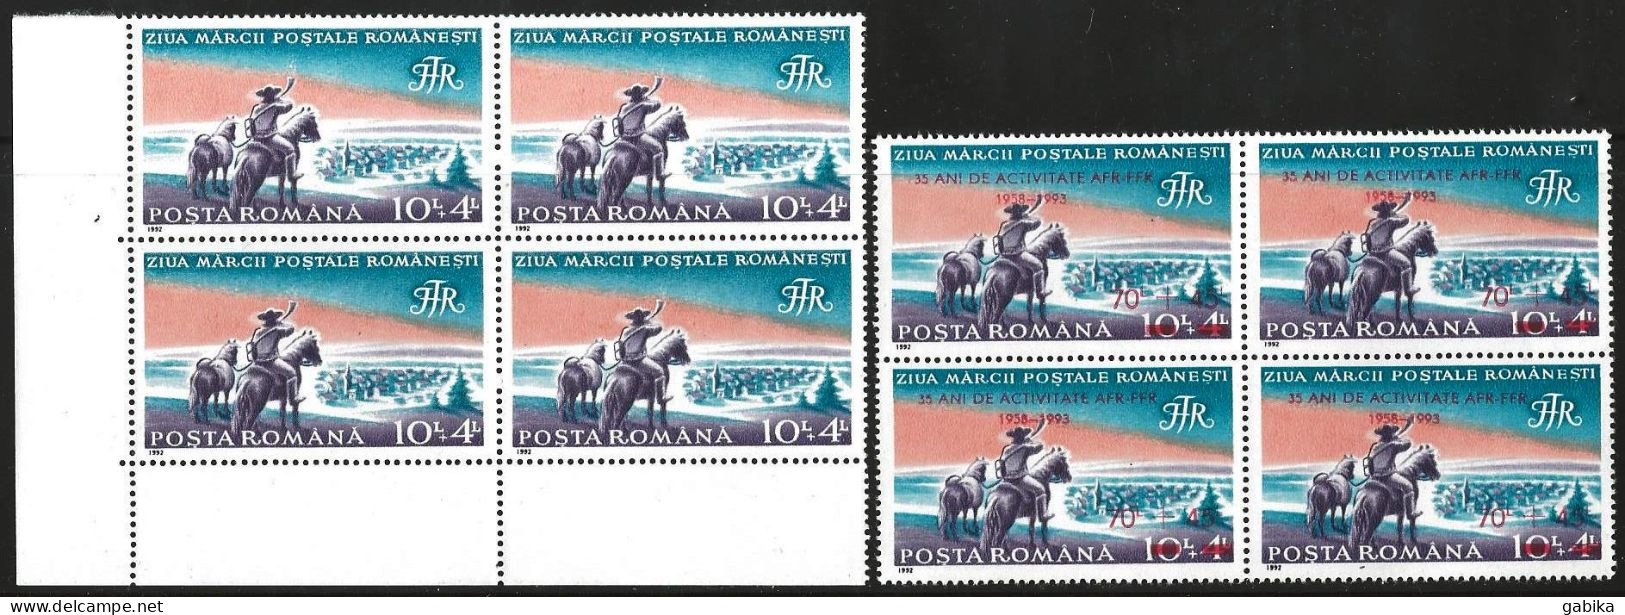 Romania 1992 1993, Scott B458 B460, MNH, Block Of Four, Without And With Overprint, Stamp Day AFR - Nuovi